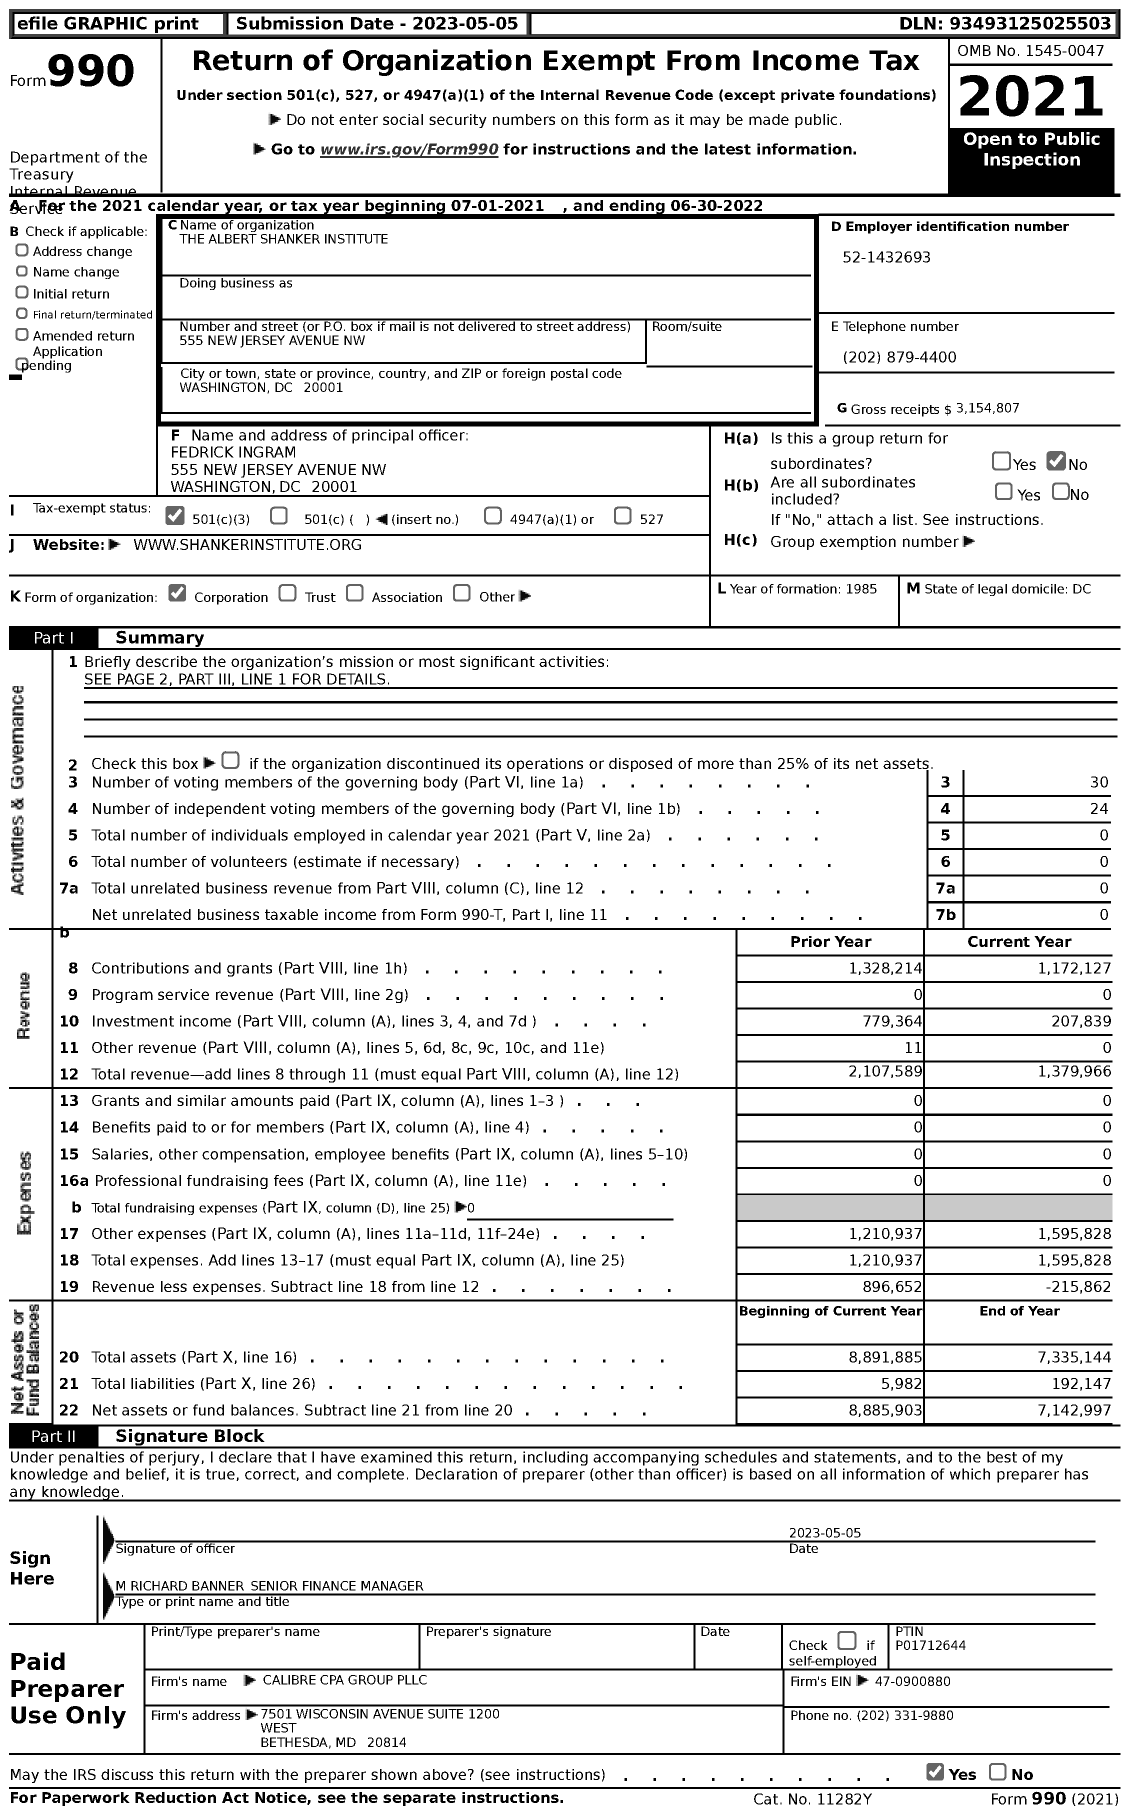 Image of first page of 2021 Form 990 for Albert Shanker Institute (ASI)